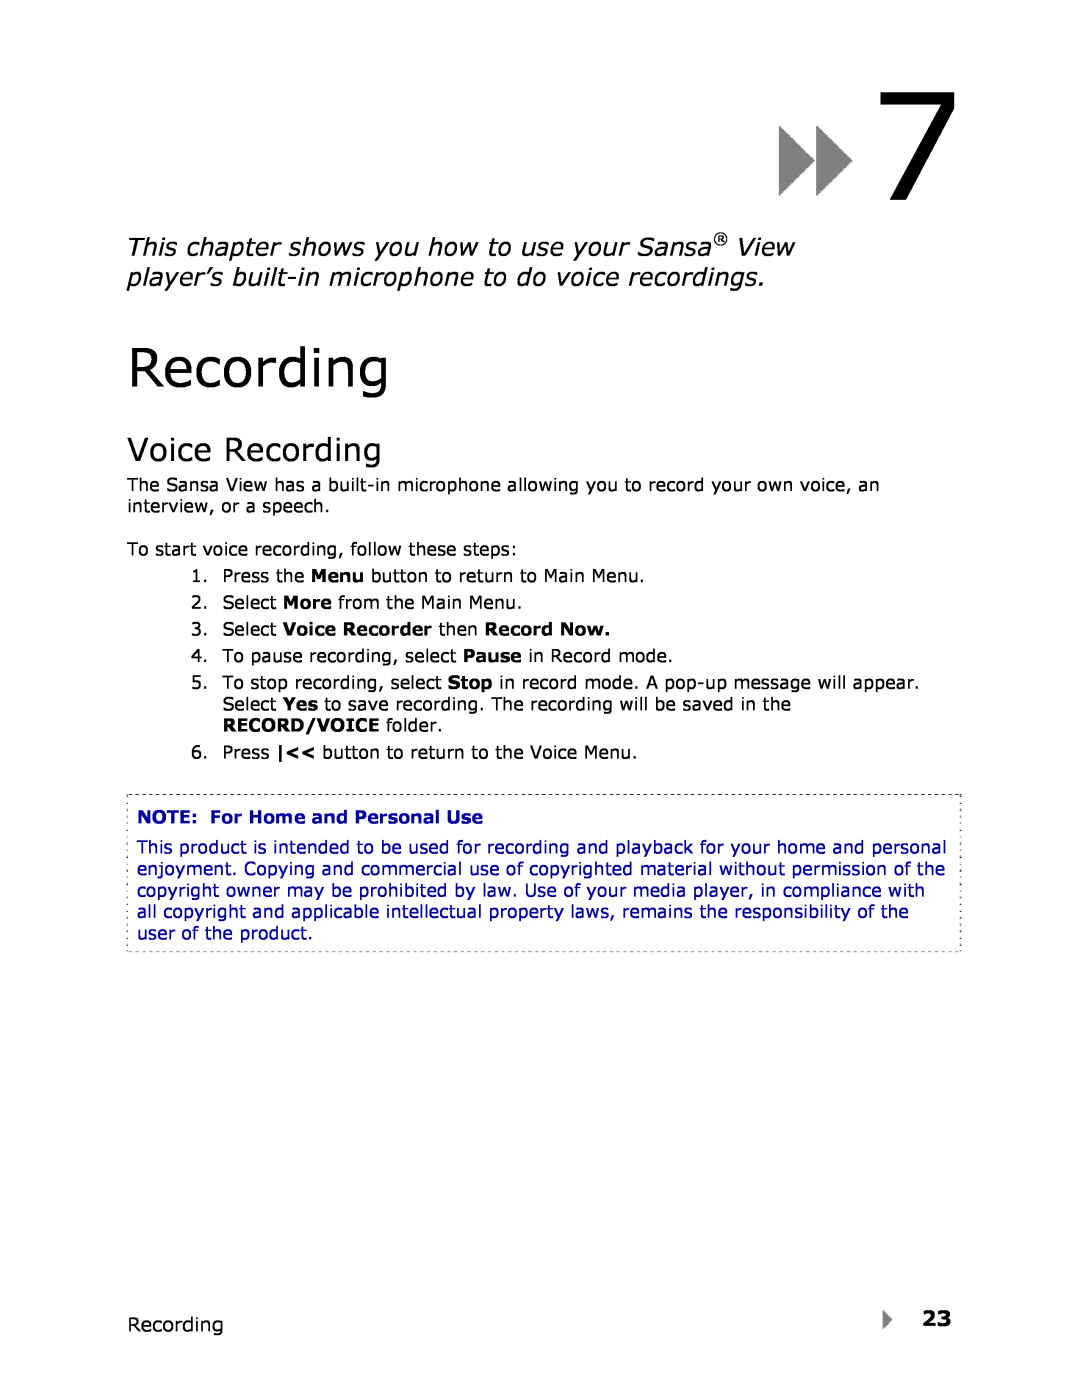 SanDisk View user manual Voice Recording, Select Voice Recorder then Record Now, NOTE For Home and Personal Use 